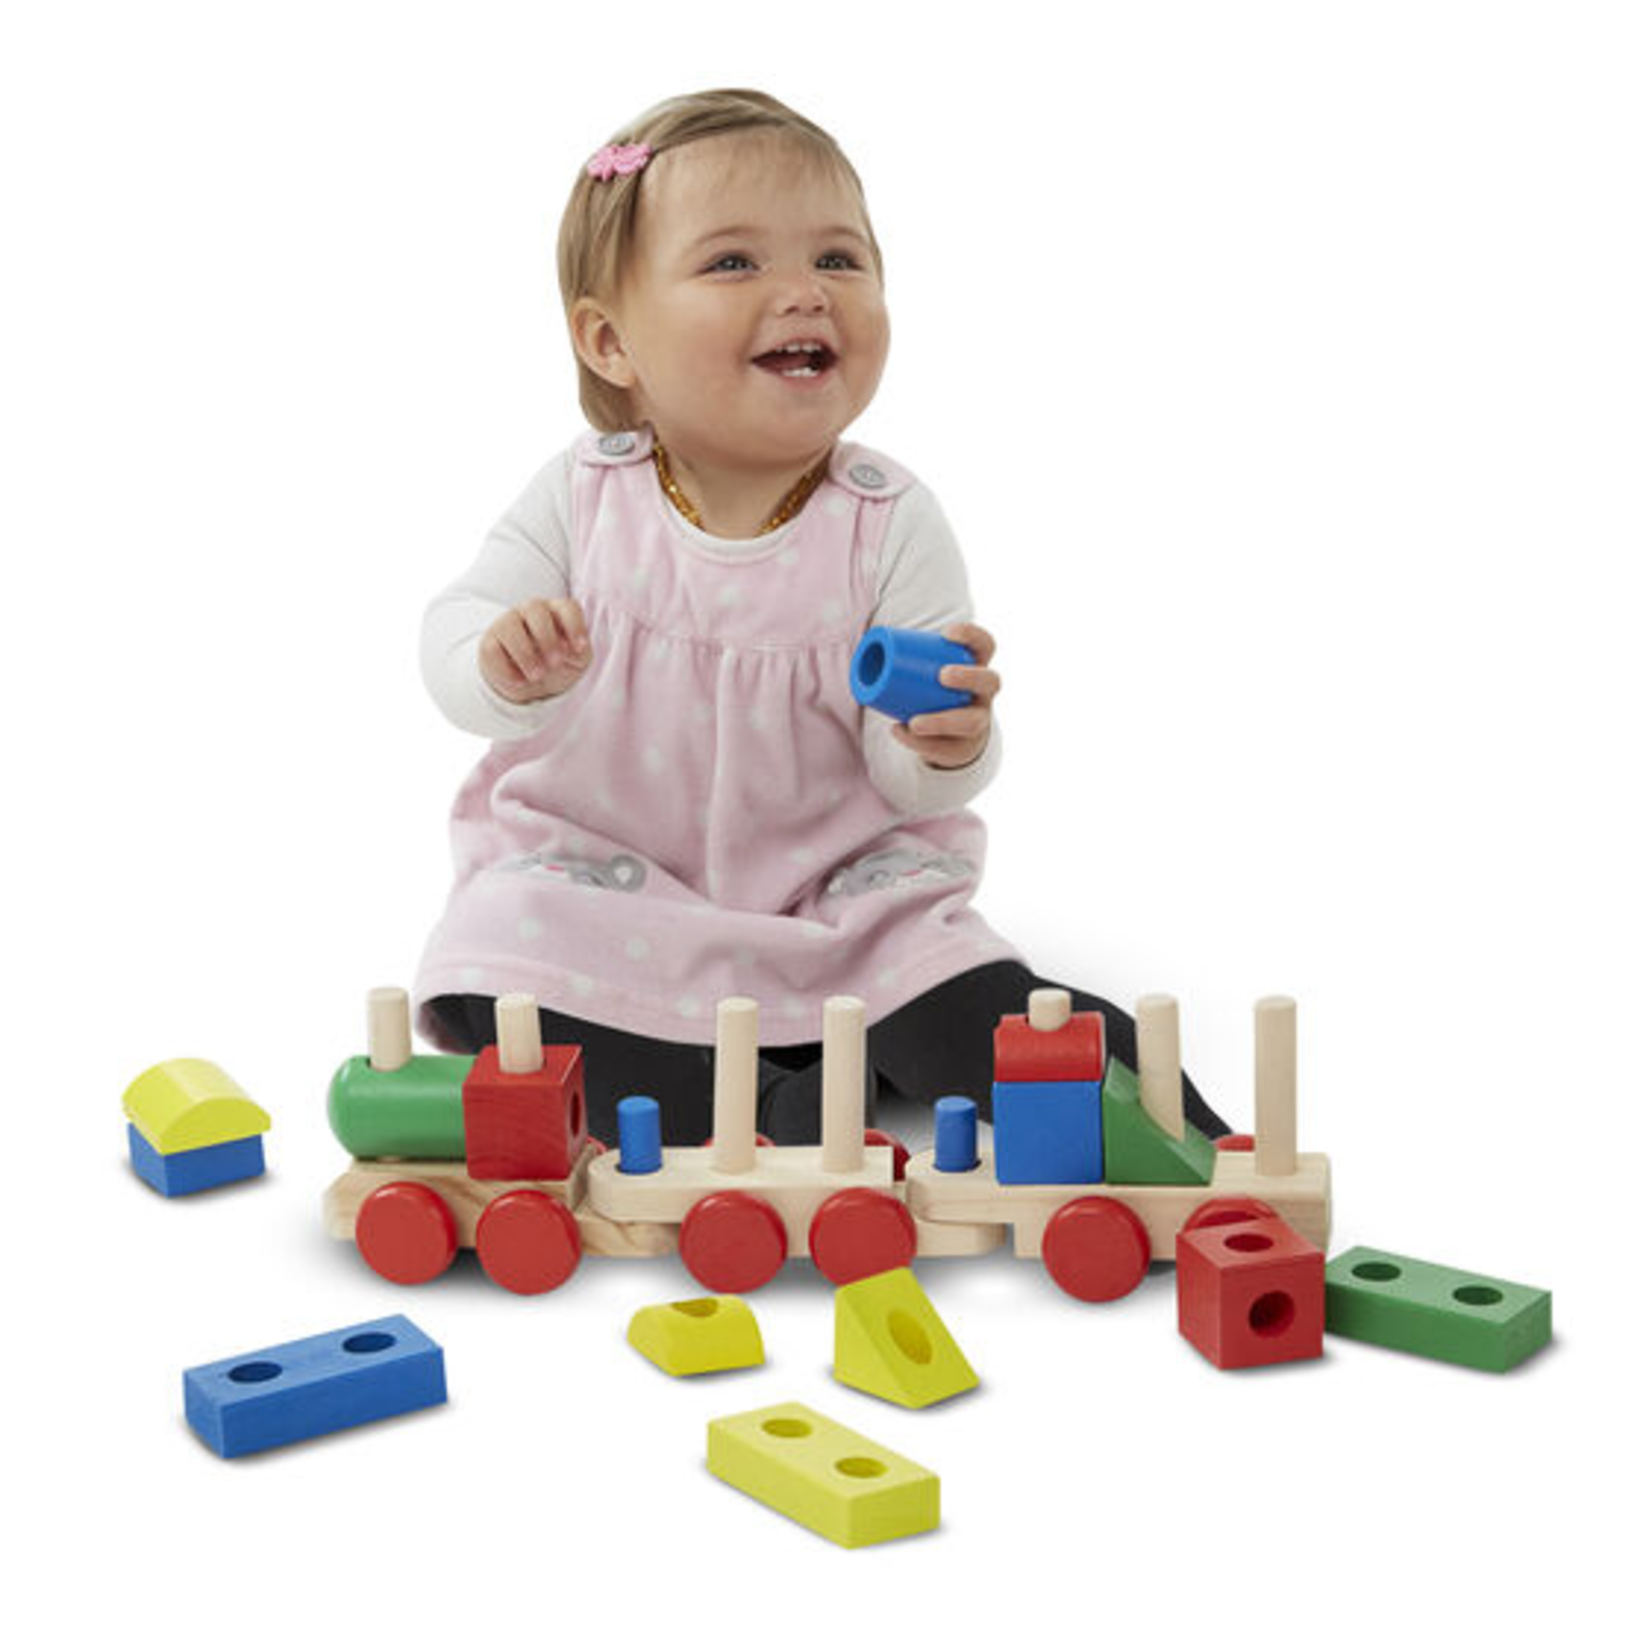 Melissa and Doug Stacking Train (18 Solid-Wood Pieces)